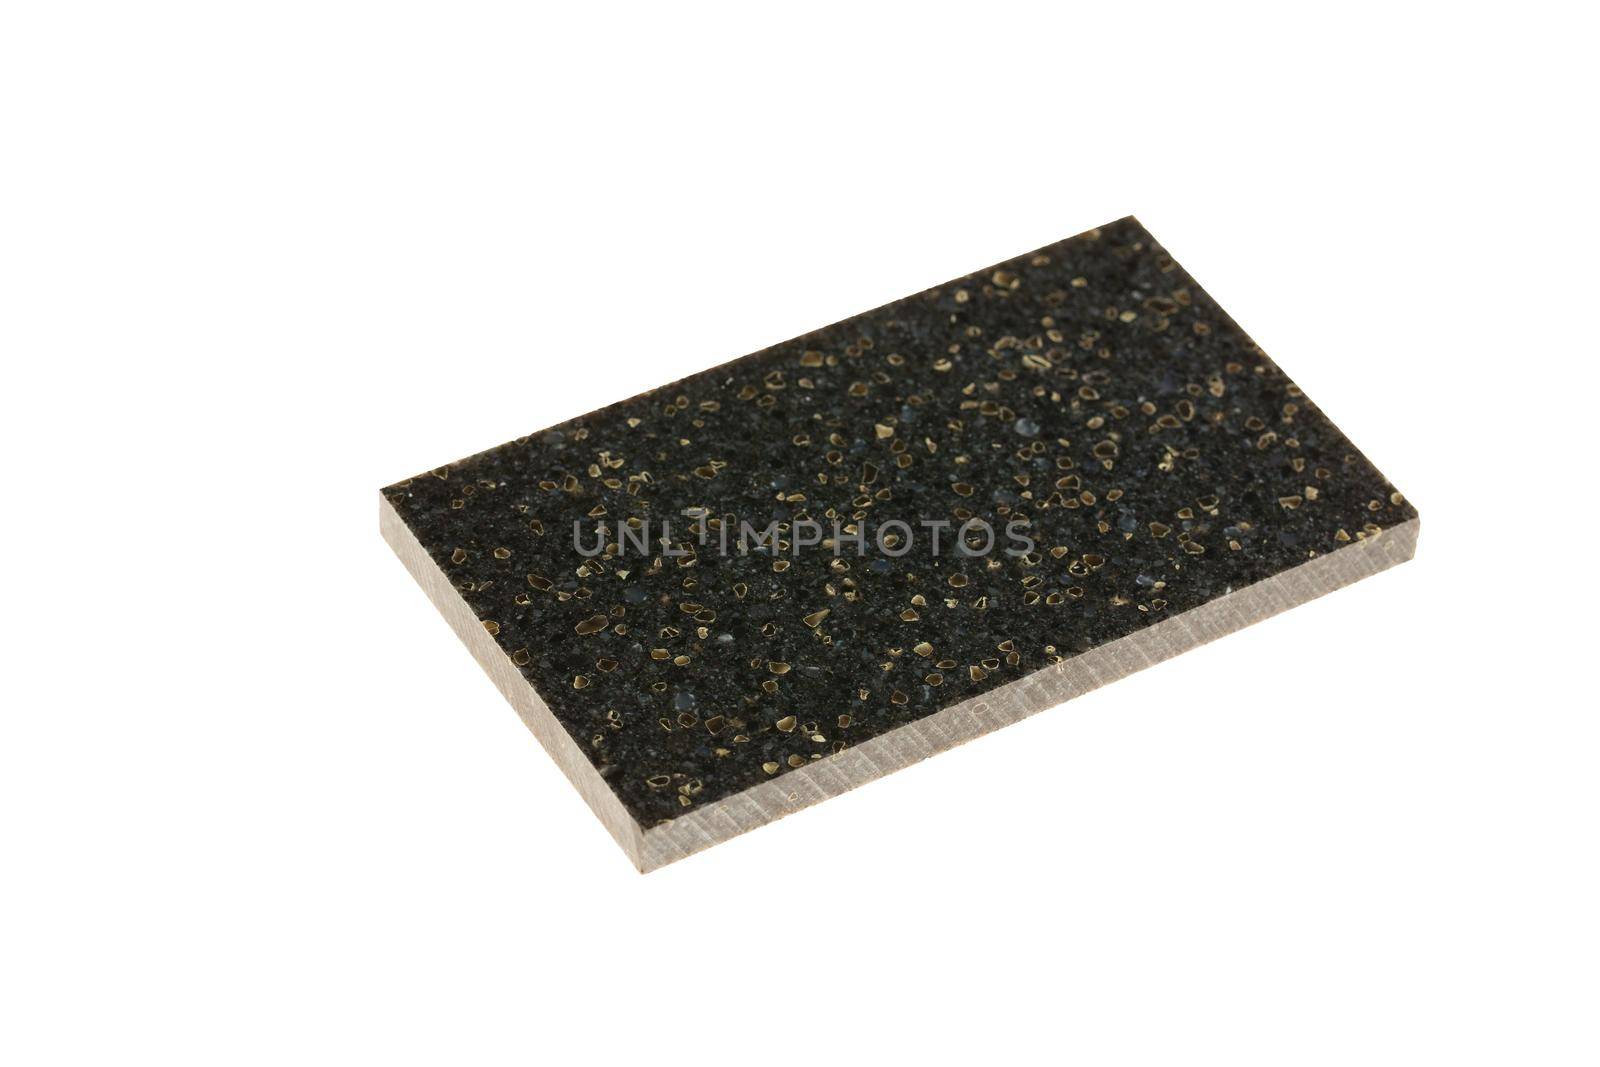 Sample of artificial stone isolated on a white background